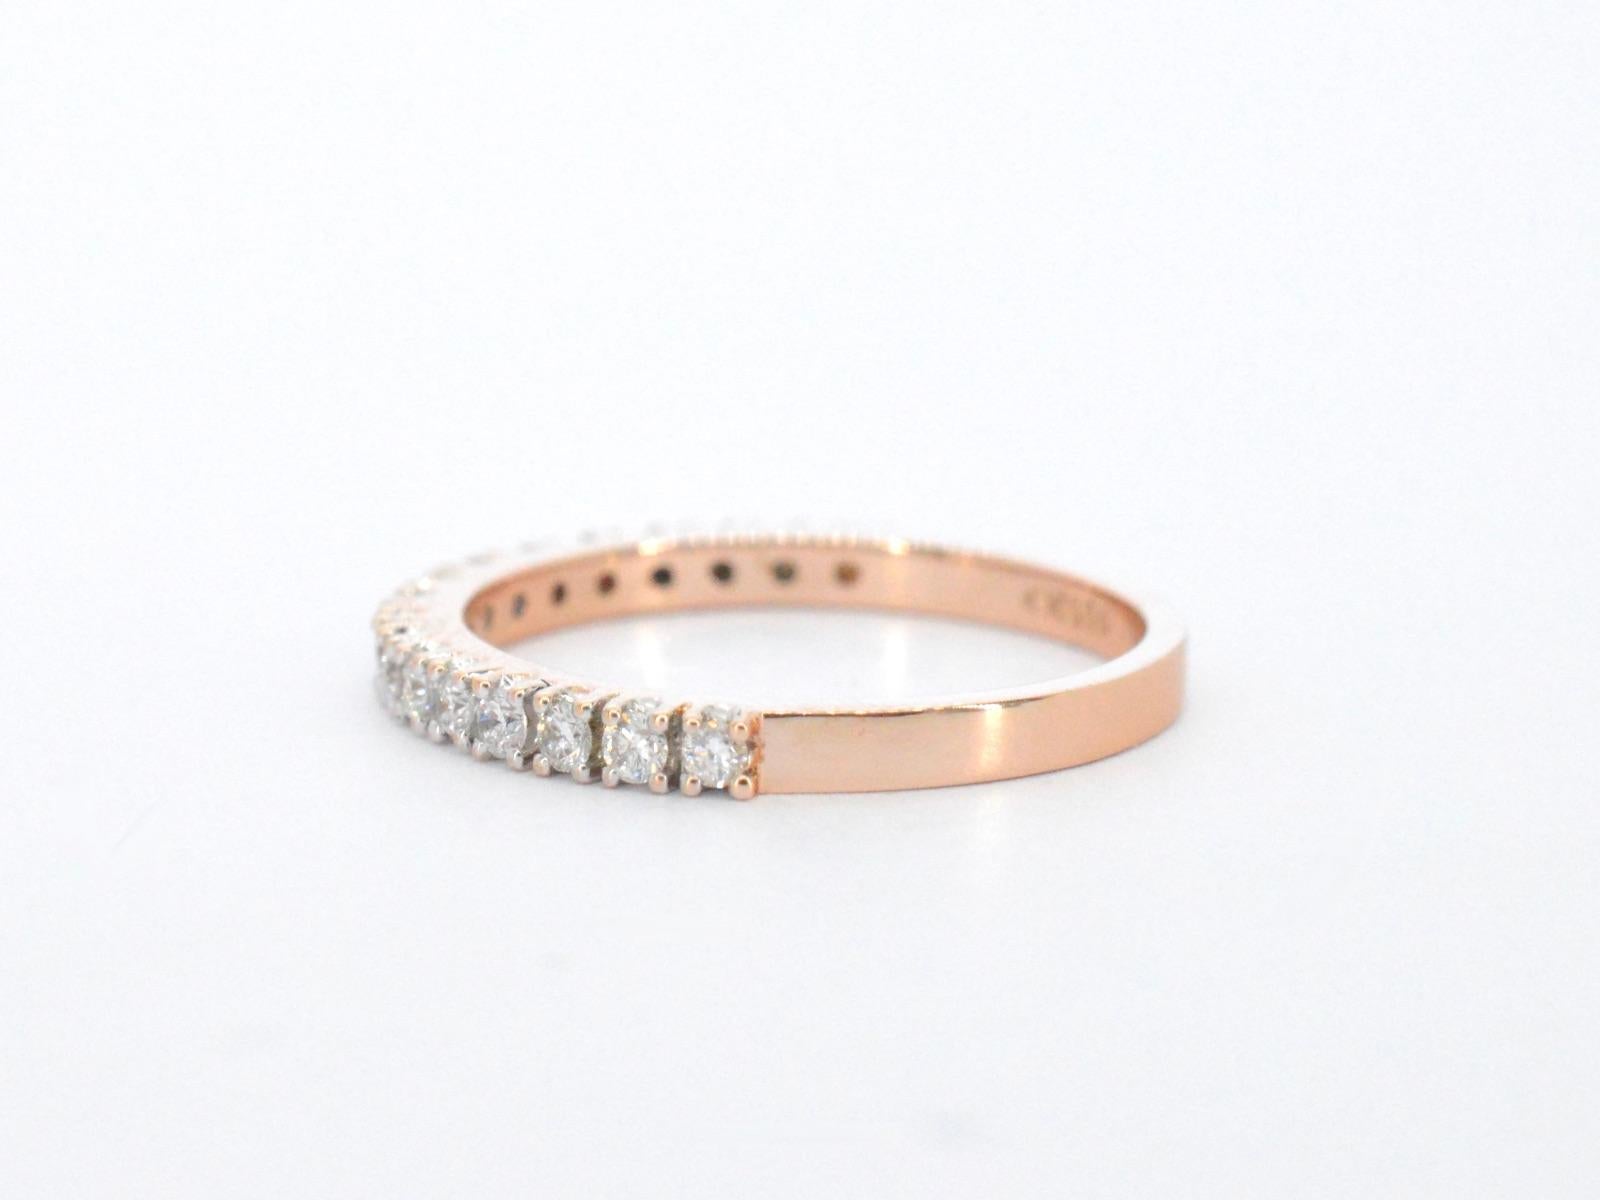 Women's Rosegolden ring with champagne colour diamonds